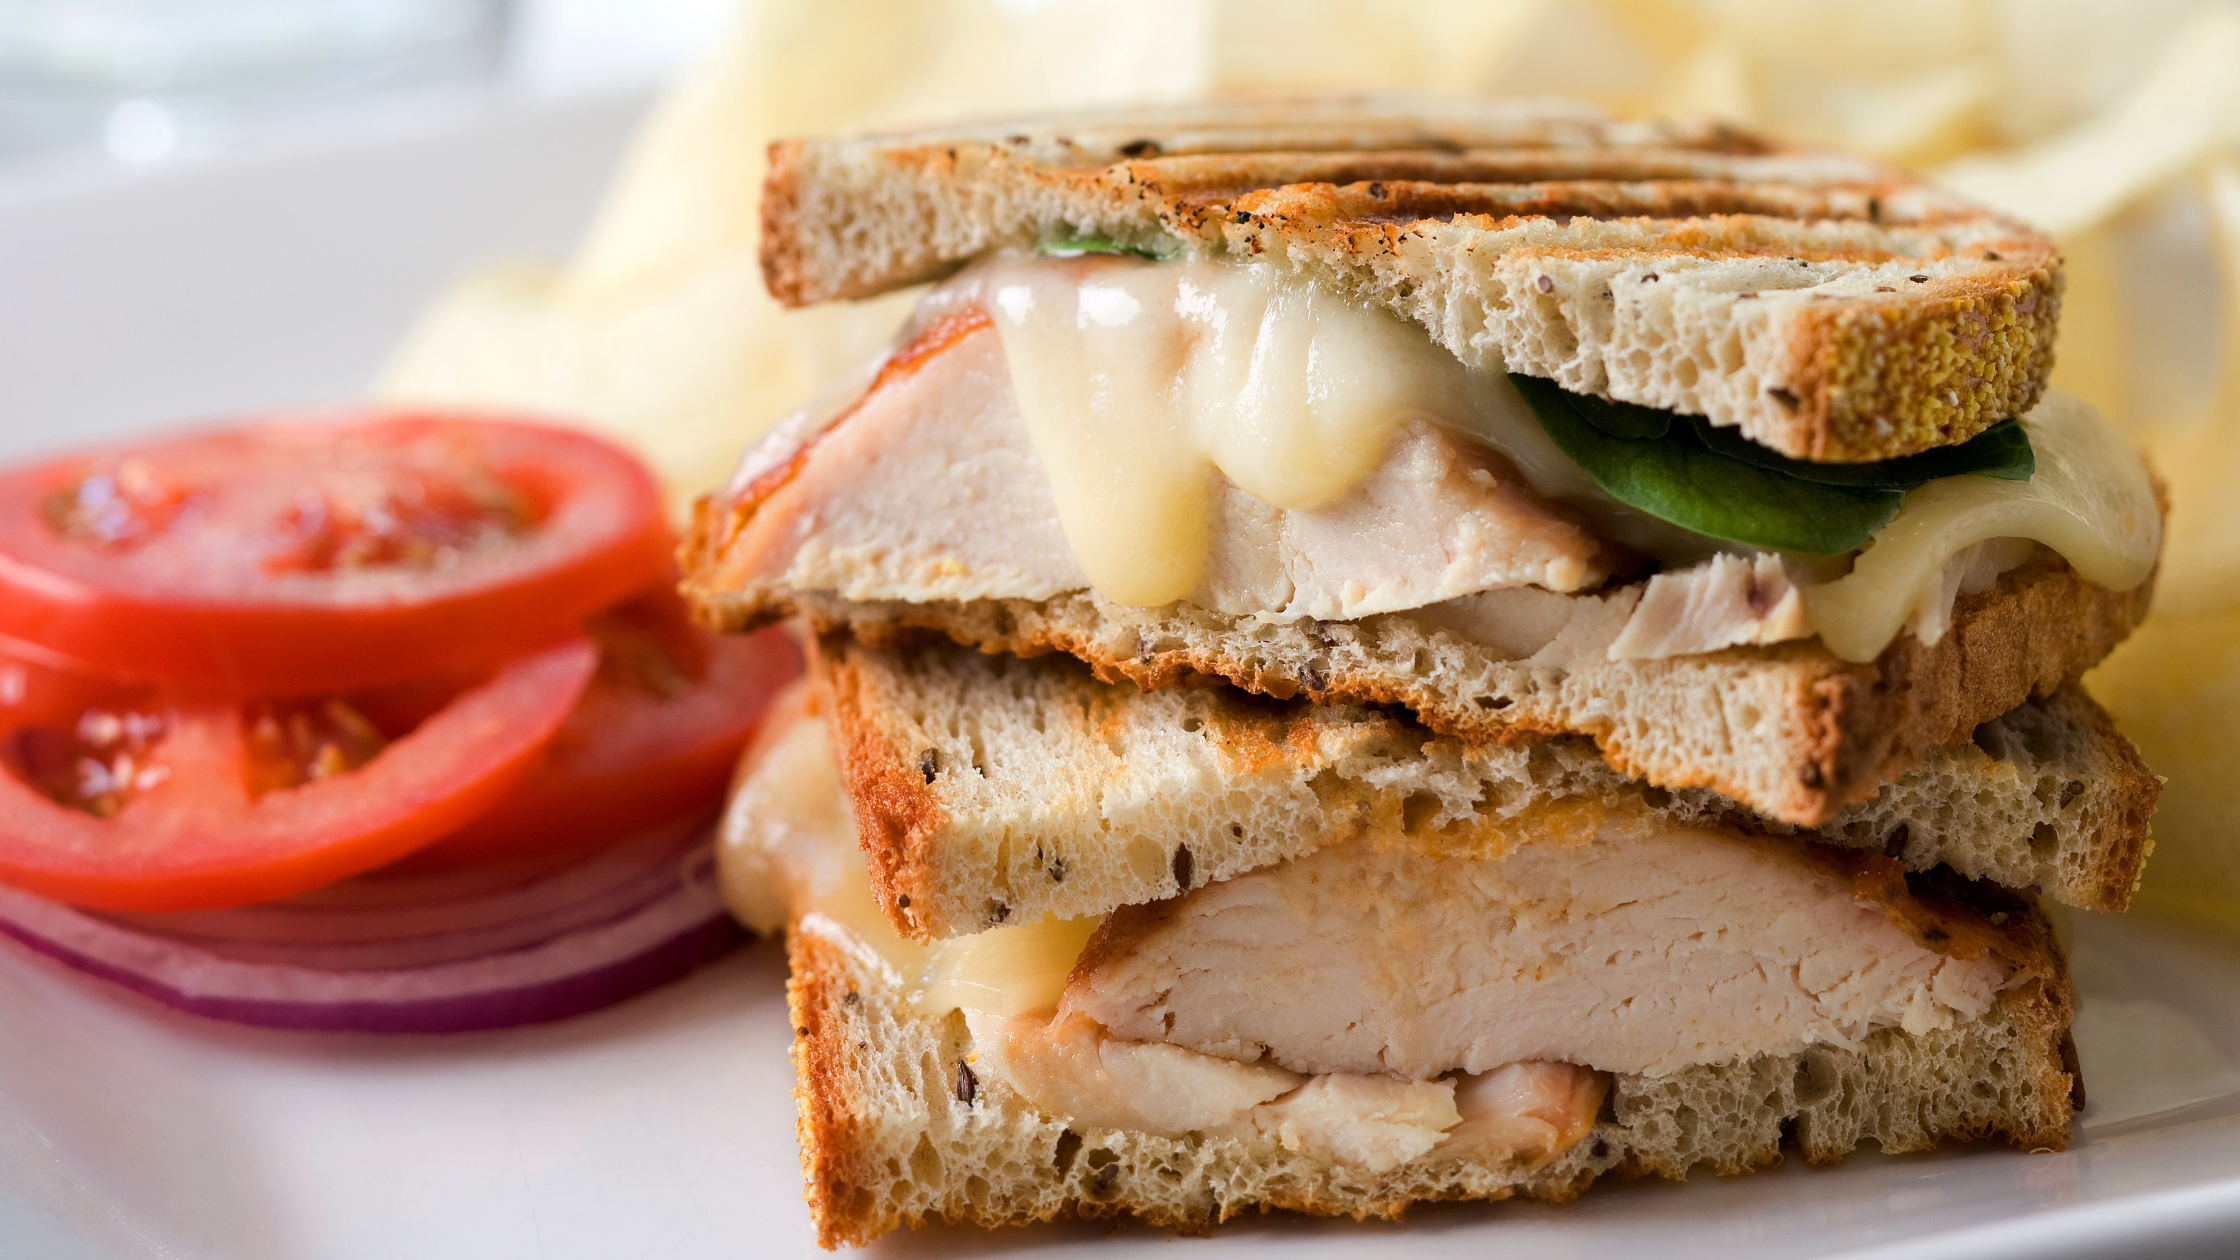 Flavorful Grilled Chicken & Brie Panini 43